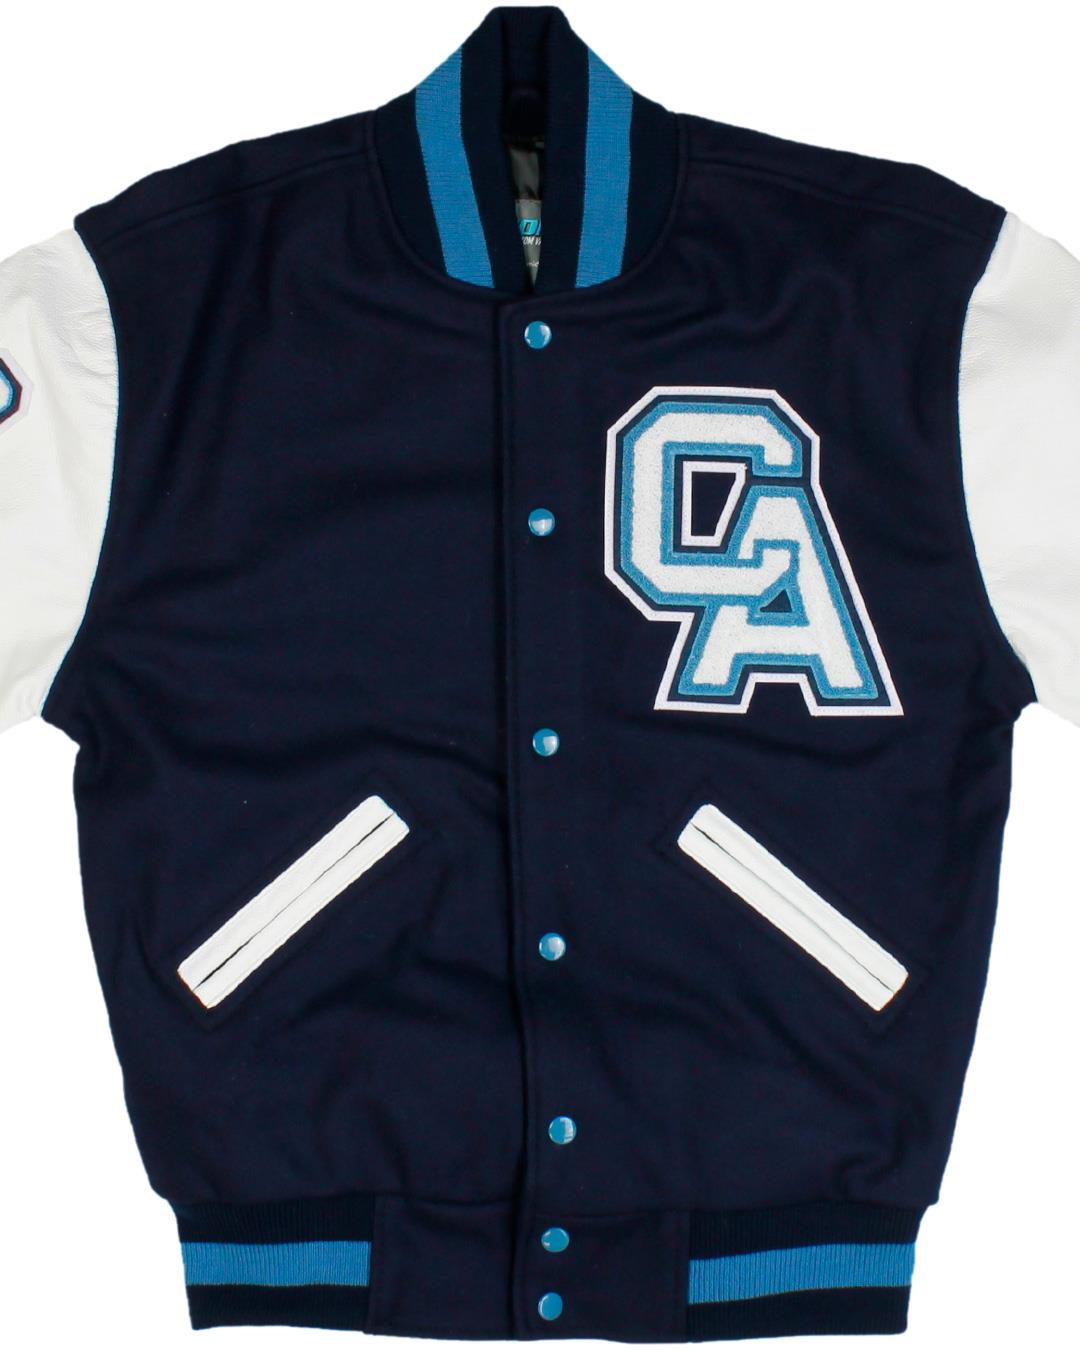 Coral Academy of Science Falcons Lettermen Jacket, Reno, NV - Front